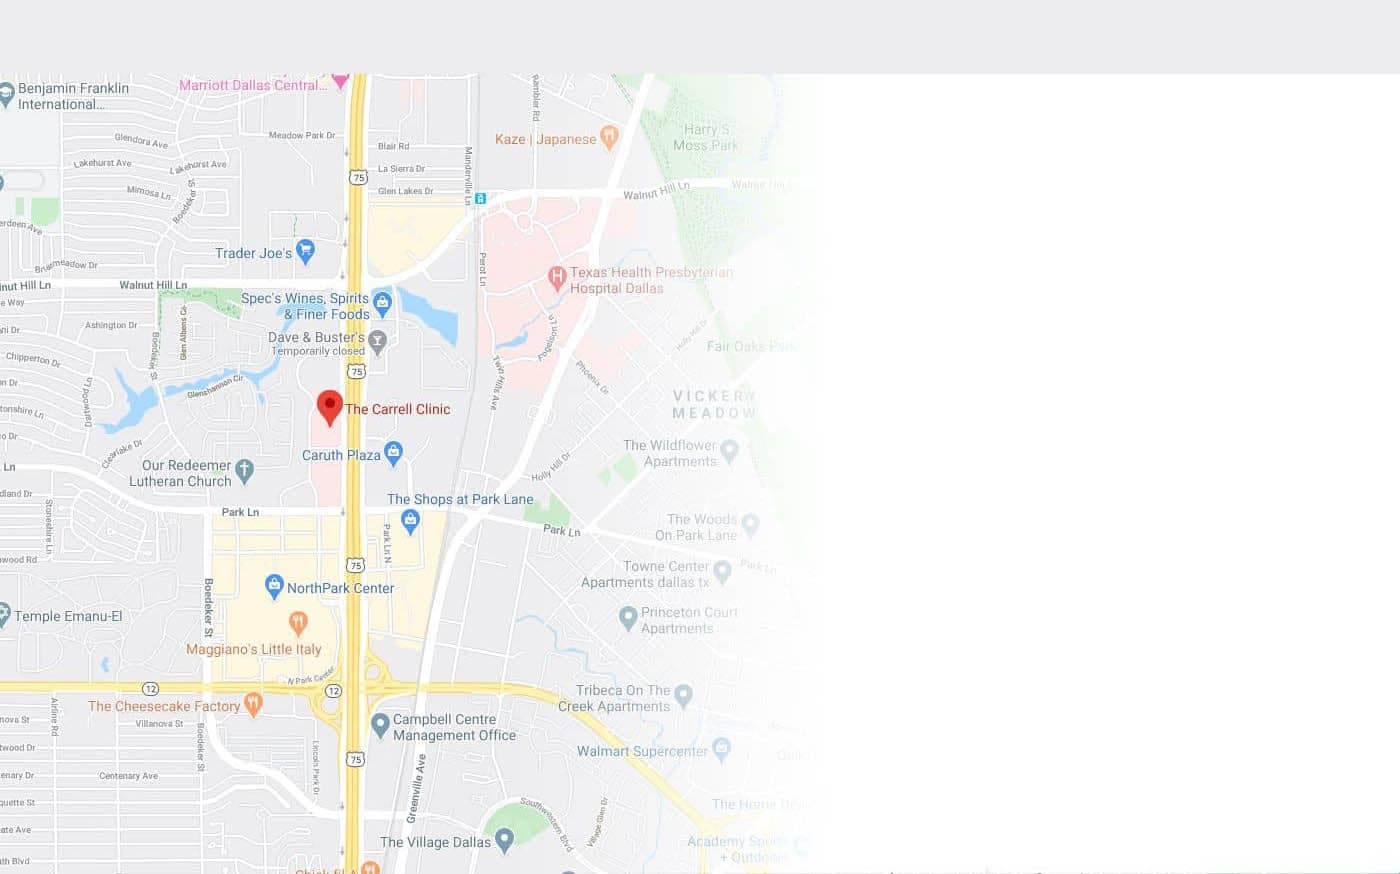 Google map image with icon